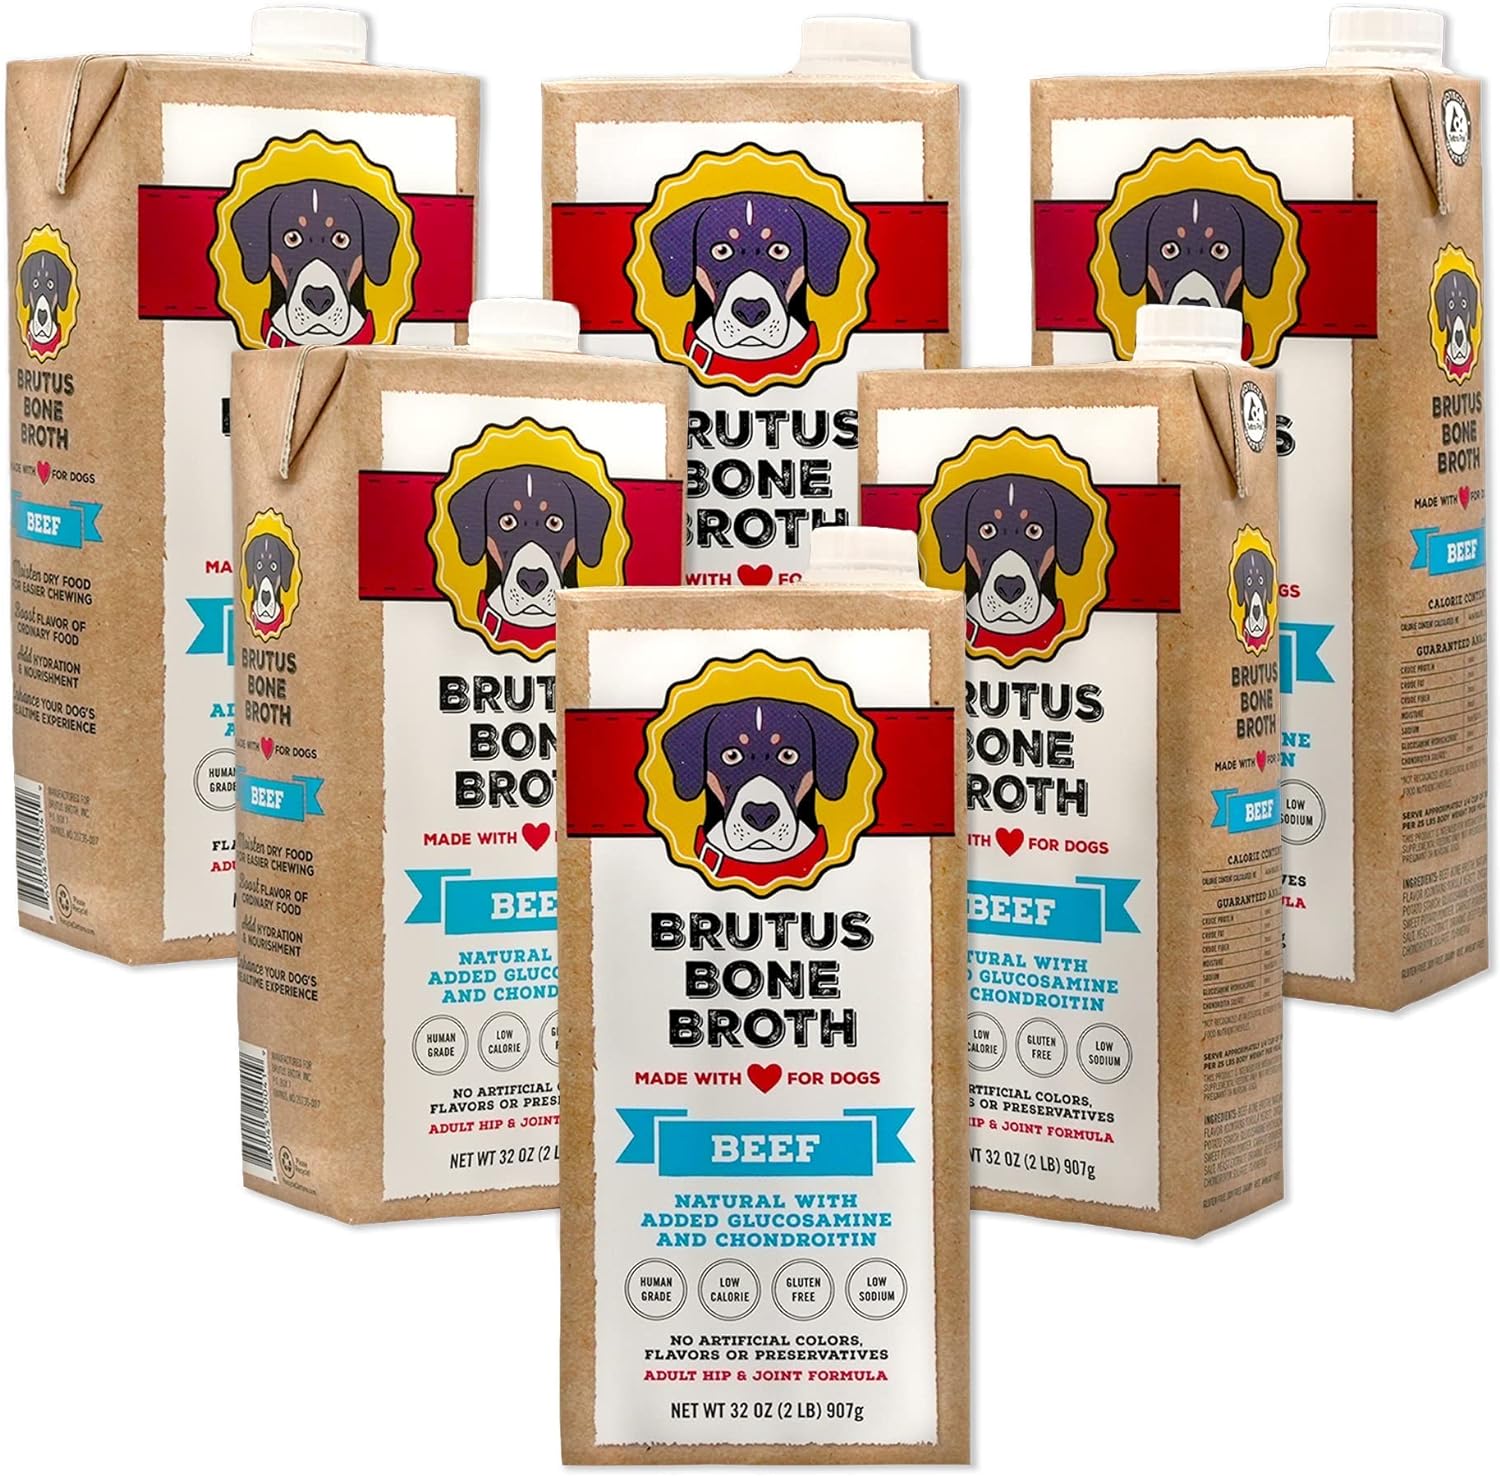 Brutus Beef Bone Broth for Dogs and Cats - All Natural Dog Bone Broth with Chondroitin Glucosamine & Turmeric -Human Grade Dog Food Toppers for Picky Eaters & Dry Food -Tasty & Nutritious- Pack of 6